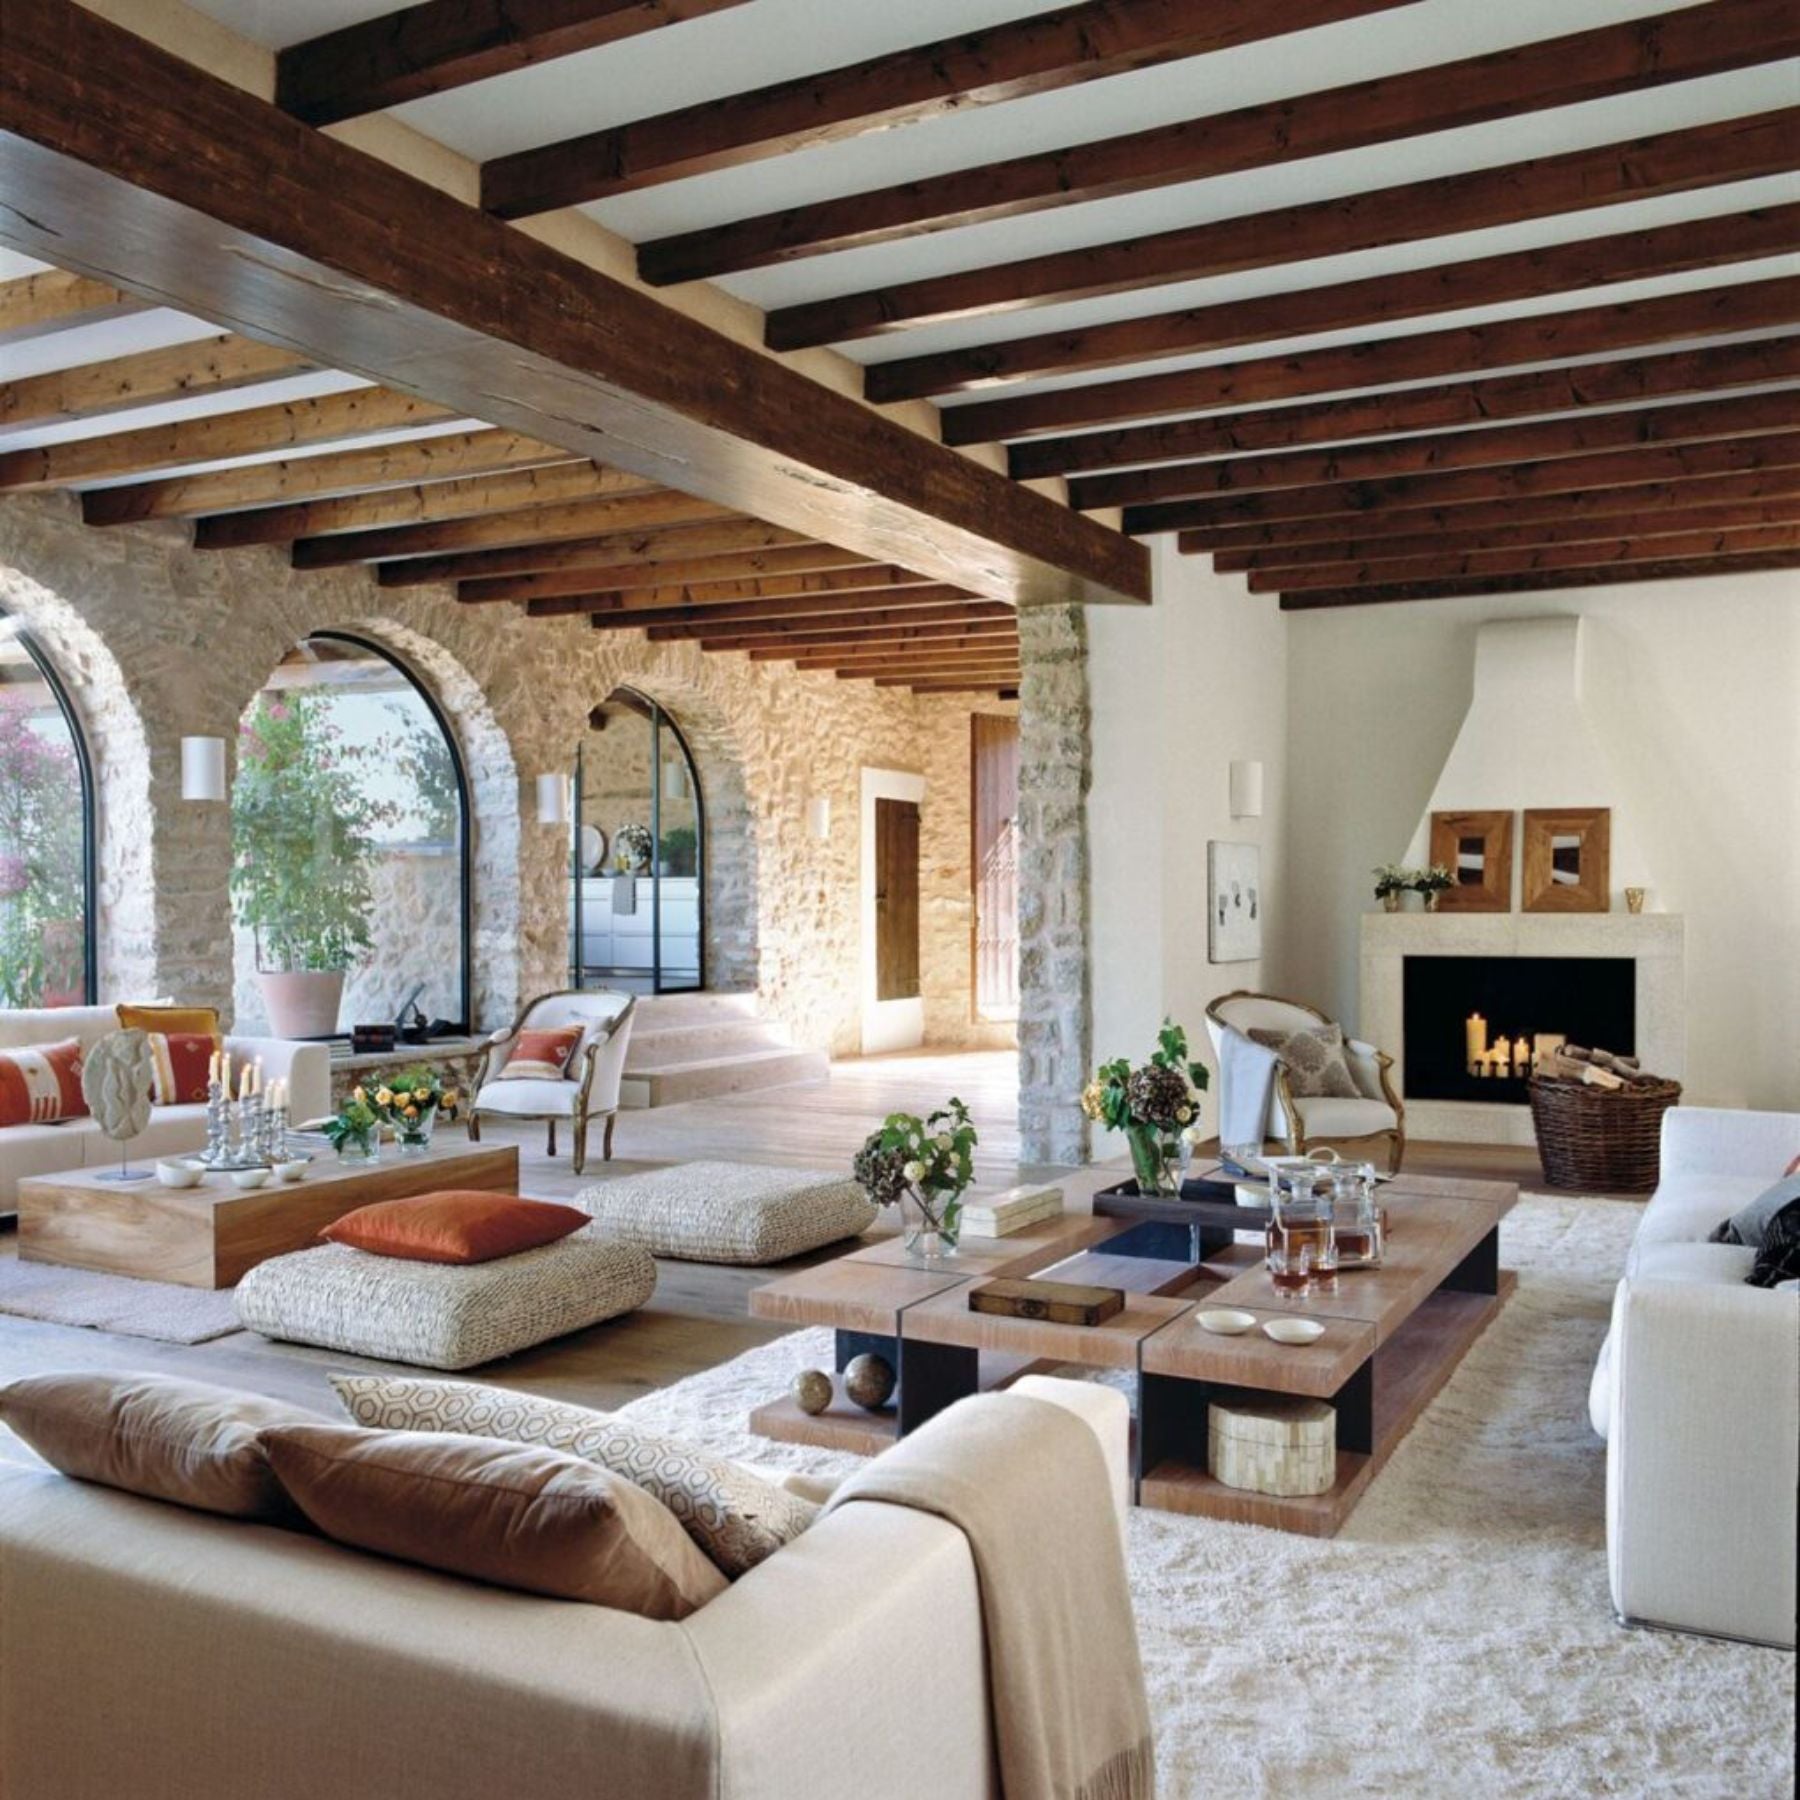 popular architecture with arched doors and windows creates a feeling of openness and connects indoor and outdoor spaces